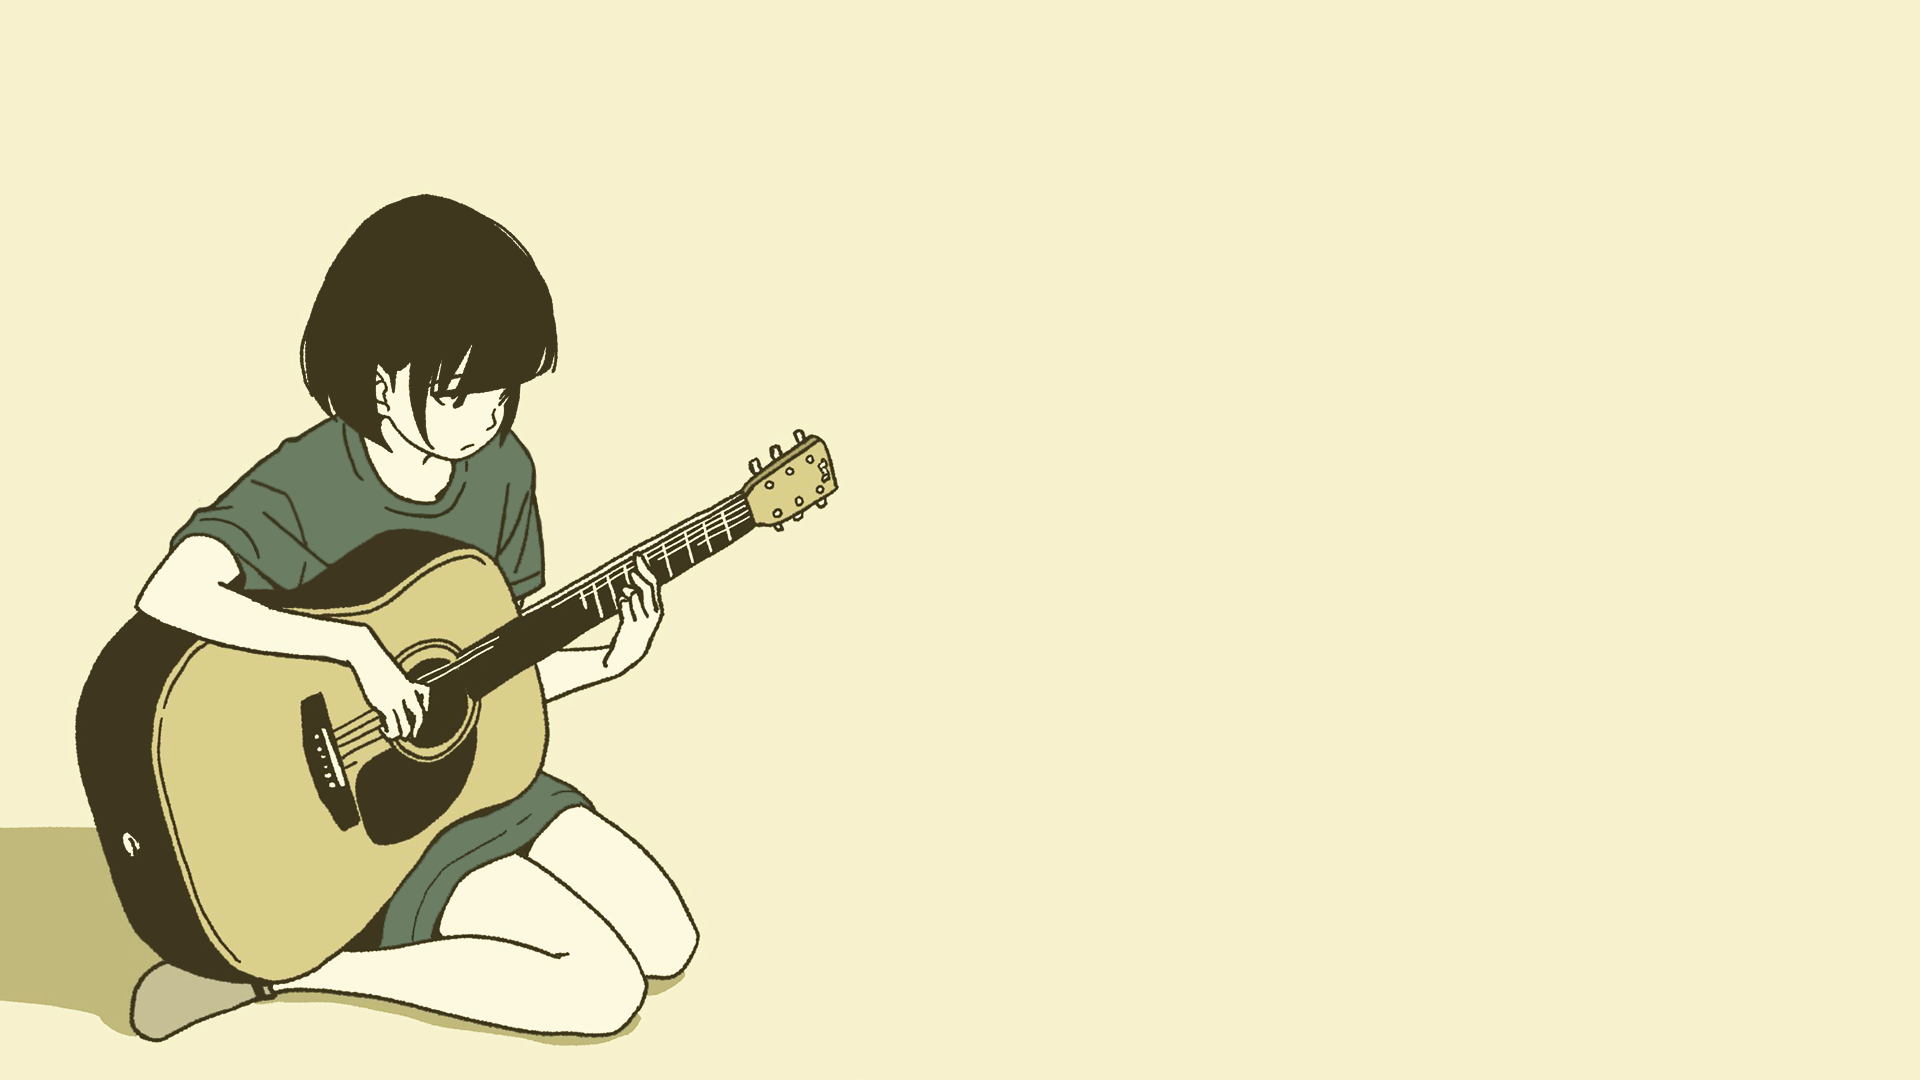 Steam Workshop::Anime Girl with Guitar at Window Raining (60 Fps)  (1920x1080)